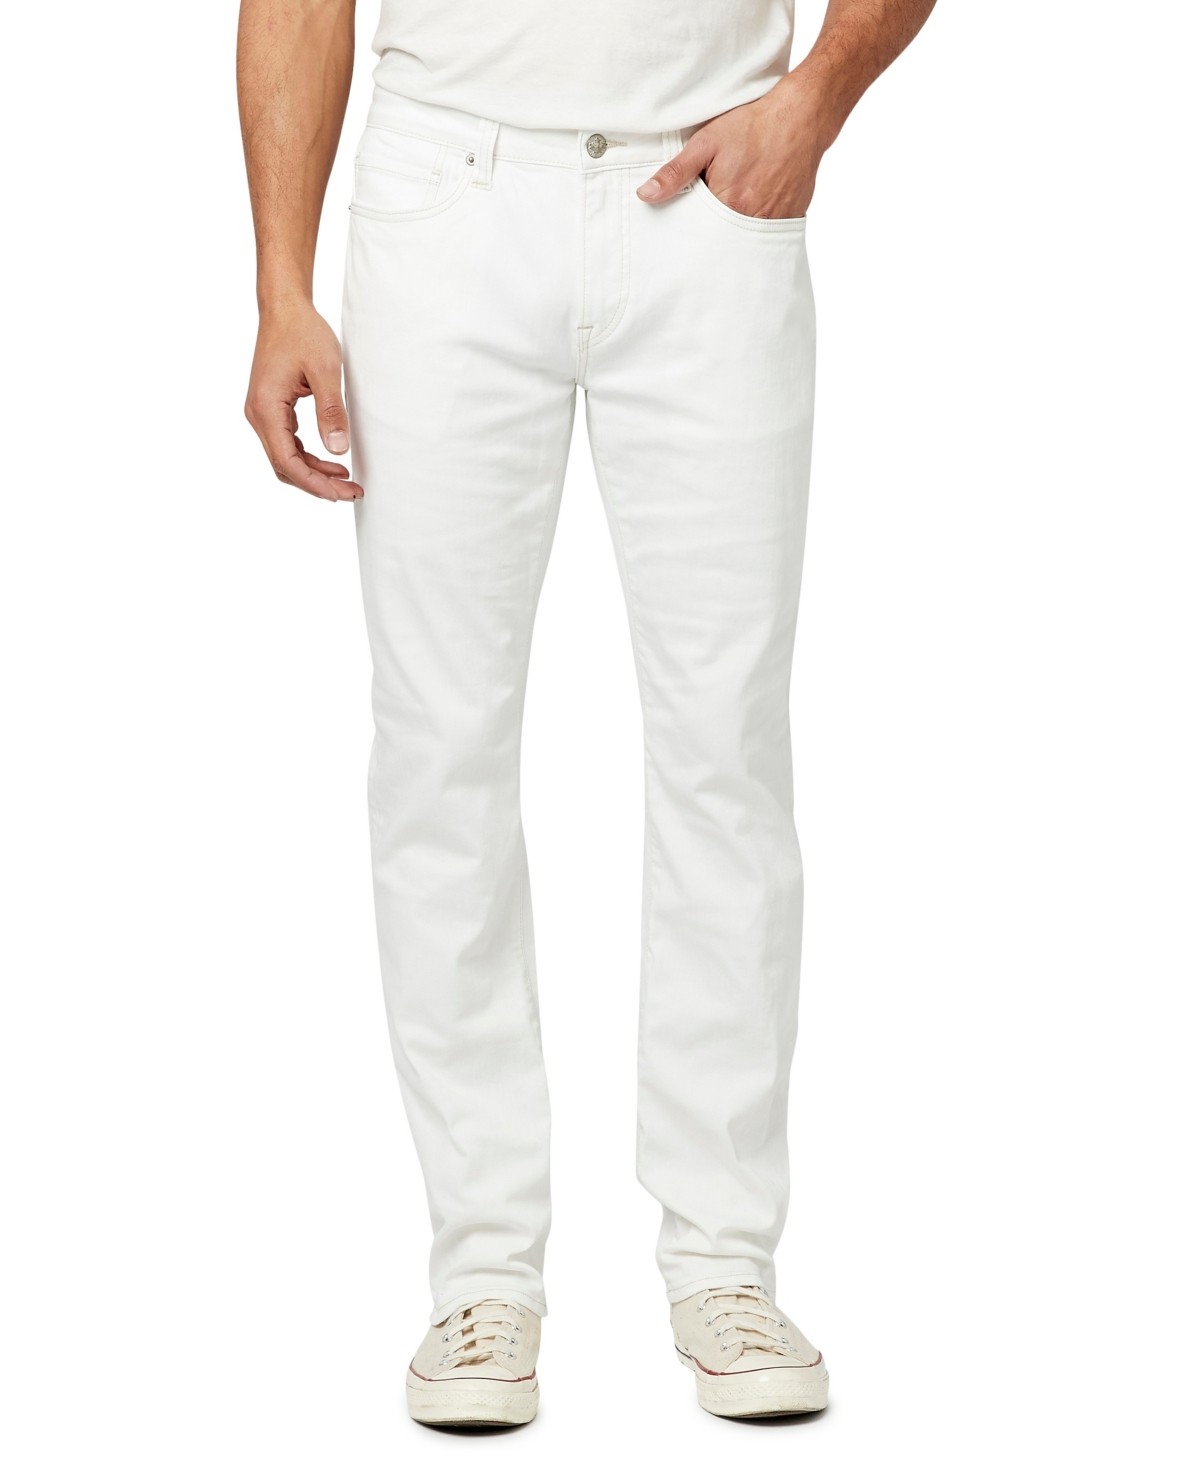 Men's Straight Six Authentic Vintage-Like Jeans - Pure White